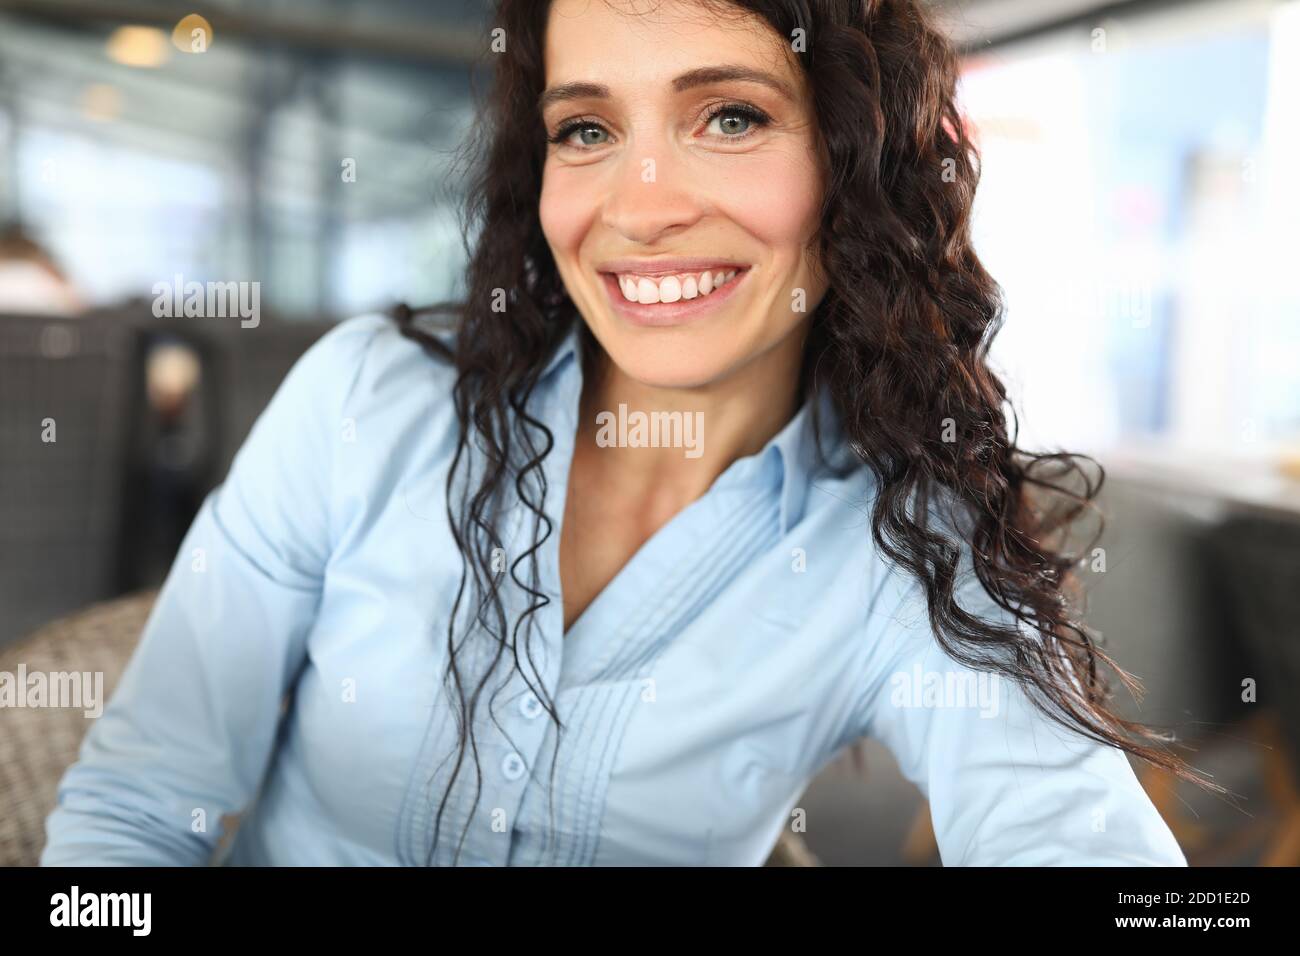 Woman on meeting on cafe Stock Photo